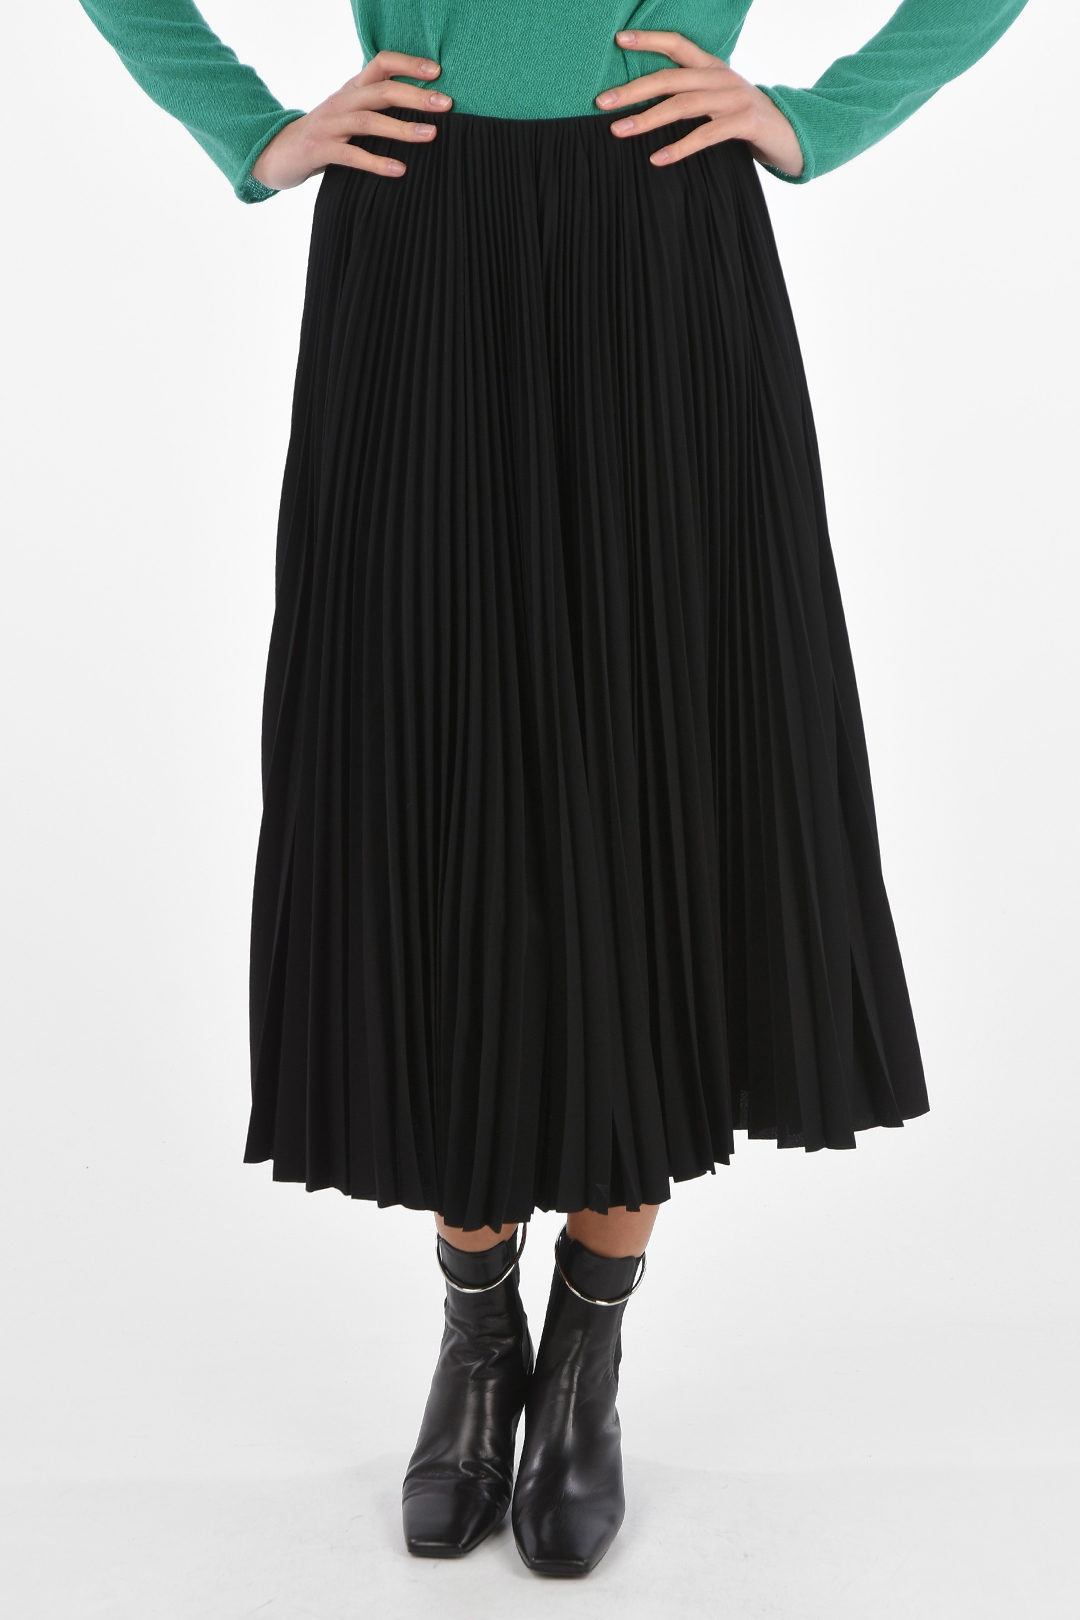 To Discuss Balenciagas Sculpted Flamenco Mullet Skirts